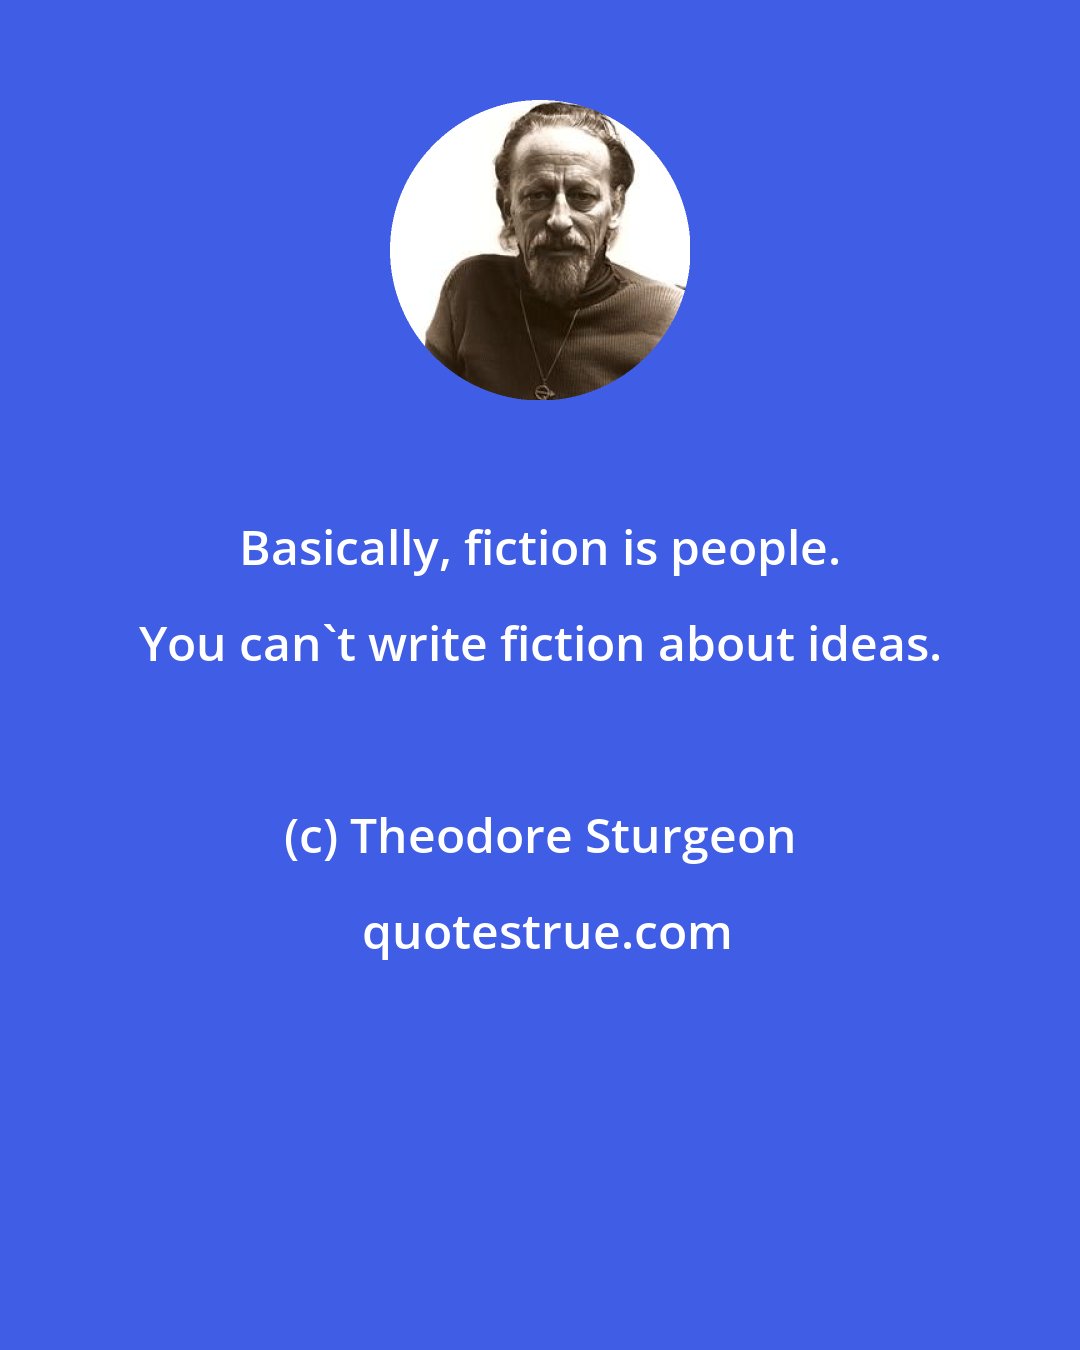 Theodore Sturgeon: Basically, fiction is people. You can't write fiction about ideas.